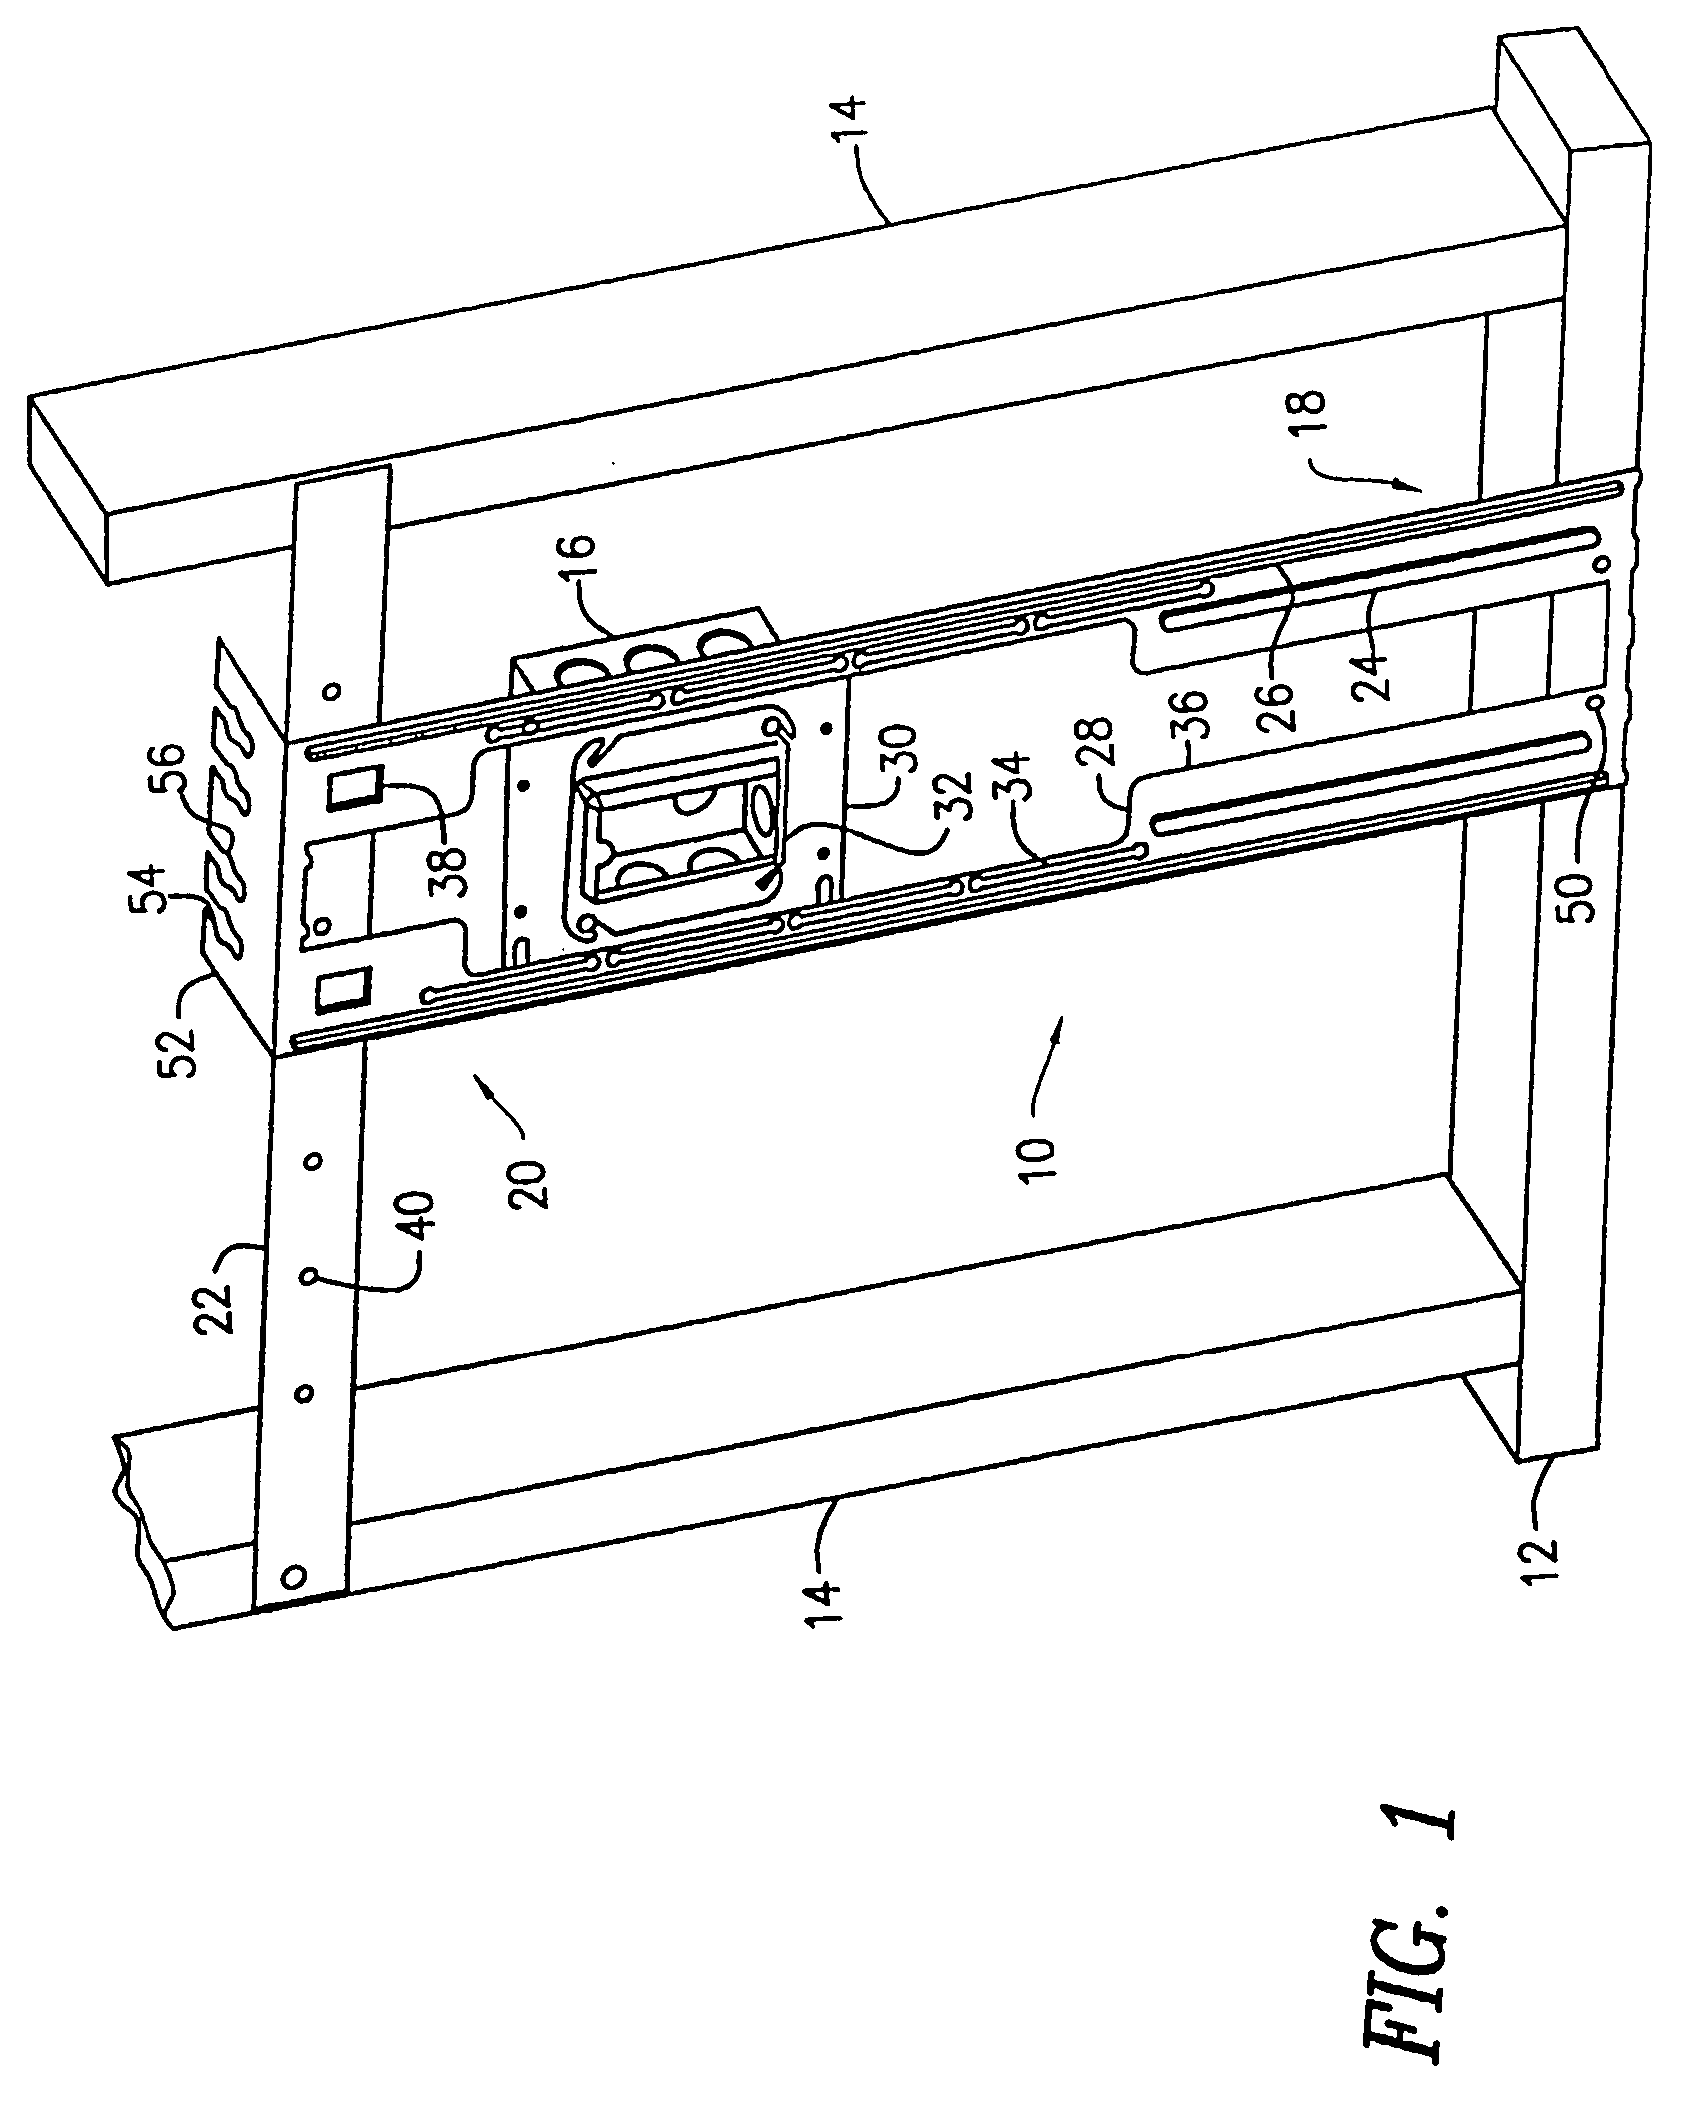 Mounting bracket for an electrical box